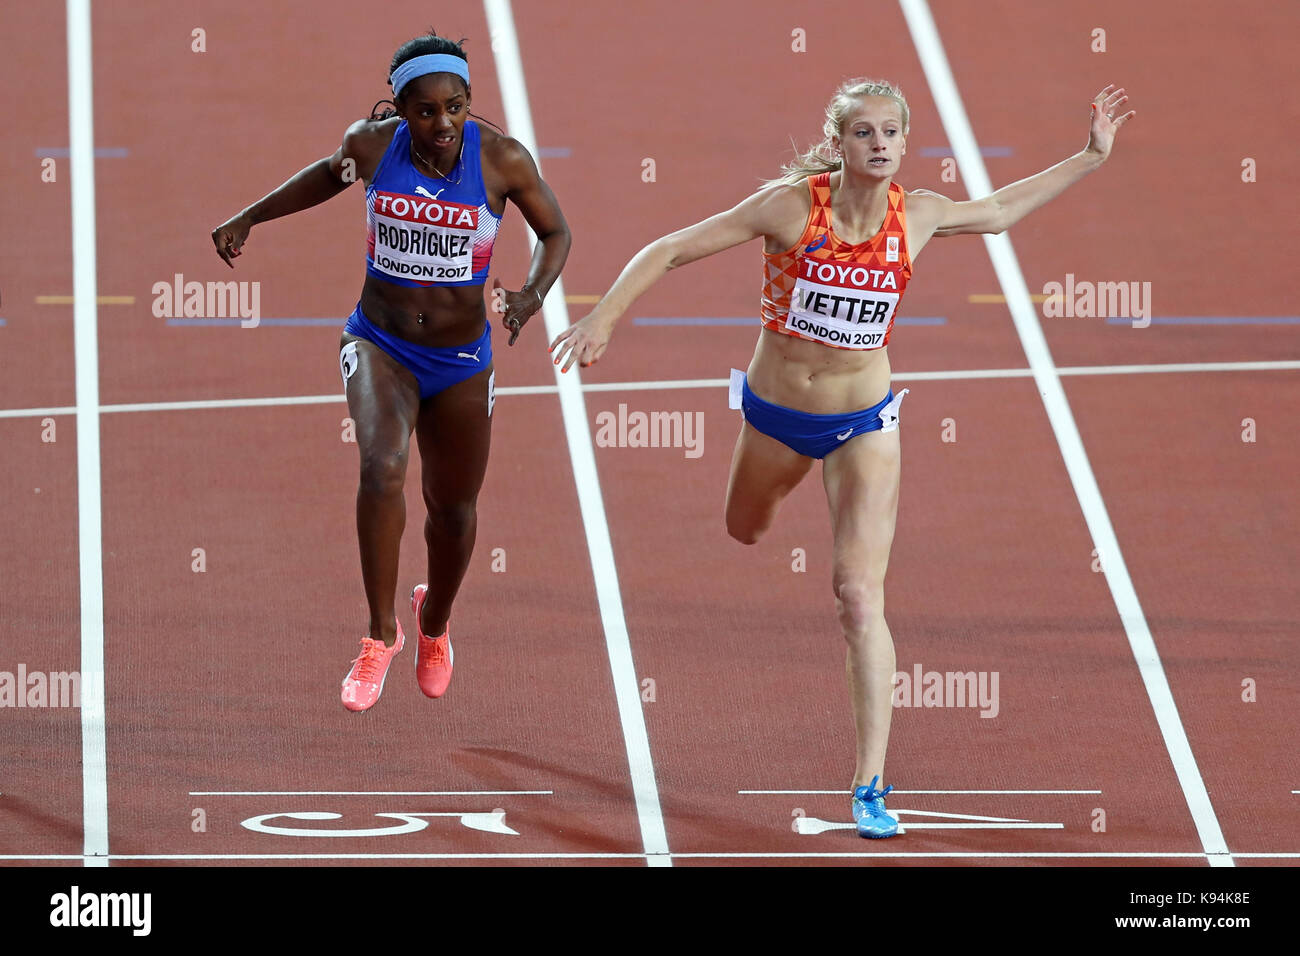 Anouk VETTER (Netherlands, Holland), Yorgelis RODRÍGUEZ (Cuba) crossing the finish line in the Heptathlon 200m Heat 3 at the 2017, IAAF World Championships, Queen Elizabeth Olympic Park, Stratford, London, UK. Stock Photo